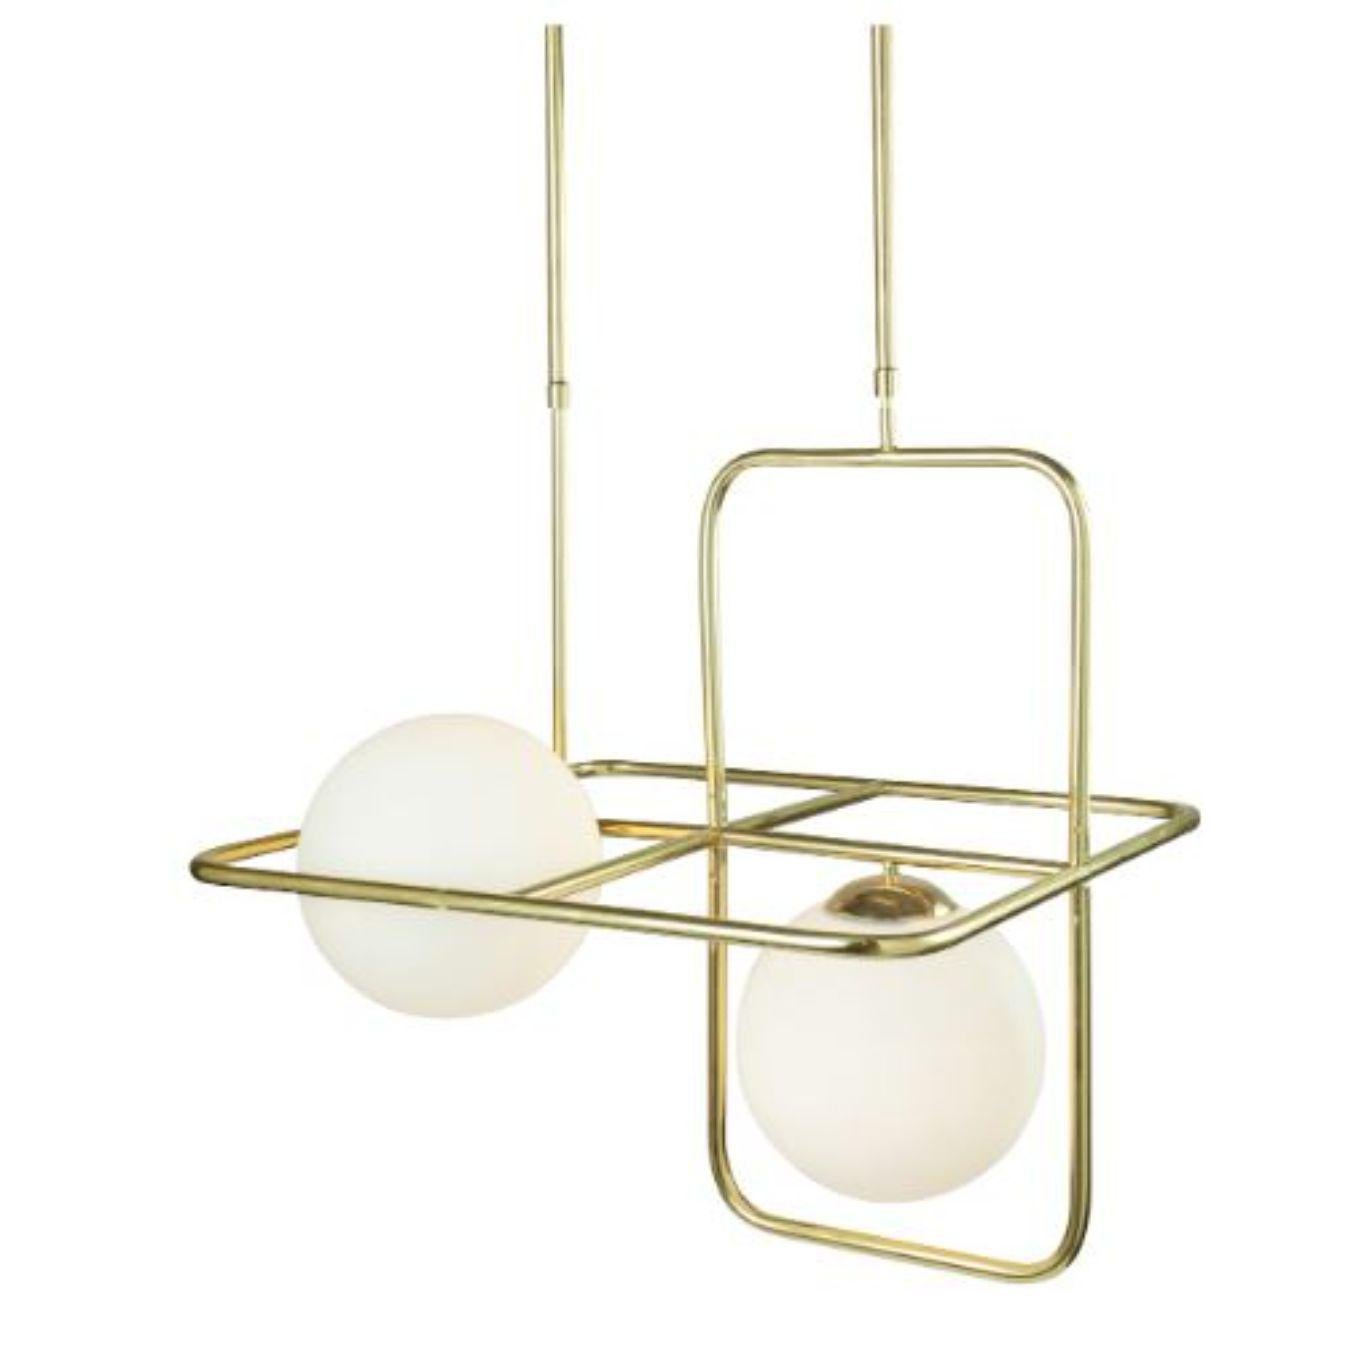 Brass link III suspension lamp by Dooq.
Dimensions: W 64 x D 64 x H 64 cm.
Materials: lacquered metal, polished or brushed metal, brass.
Also available in different colours and materials. 

Information:
230V/50Hz
2 x max. G9
5W LED

120V/60Hz
2 x